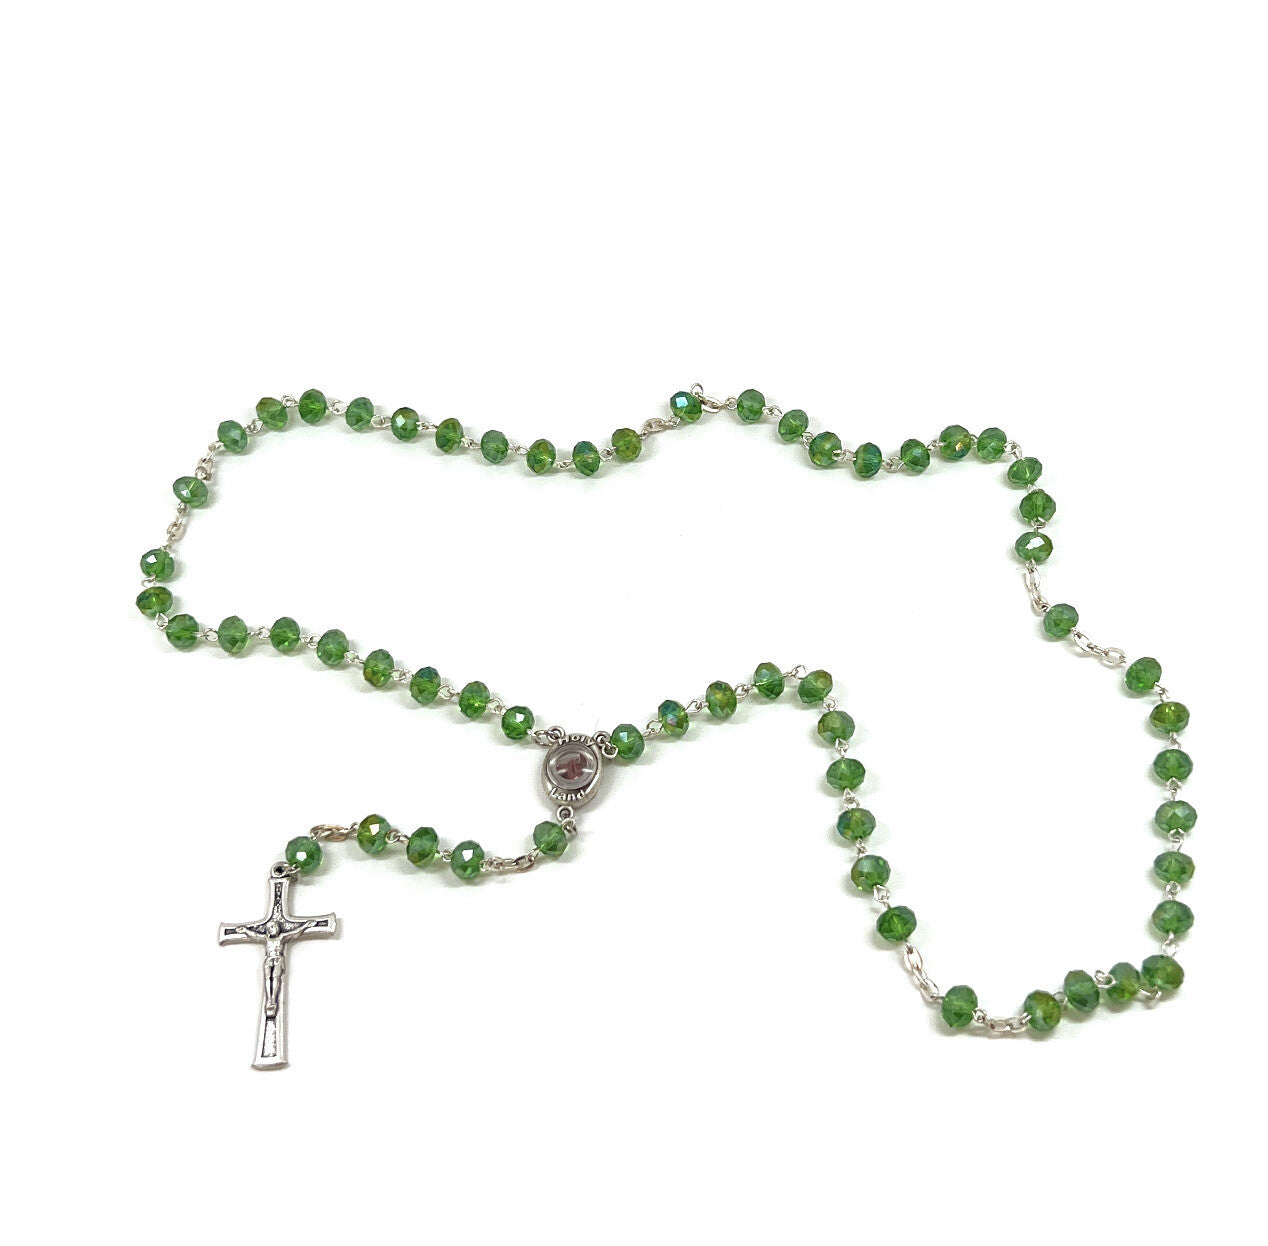 Rosary with Green Crystal Beads, Metal Chain with 2" Crucifix, Made in Holy Land